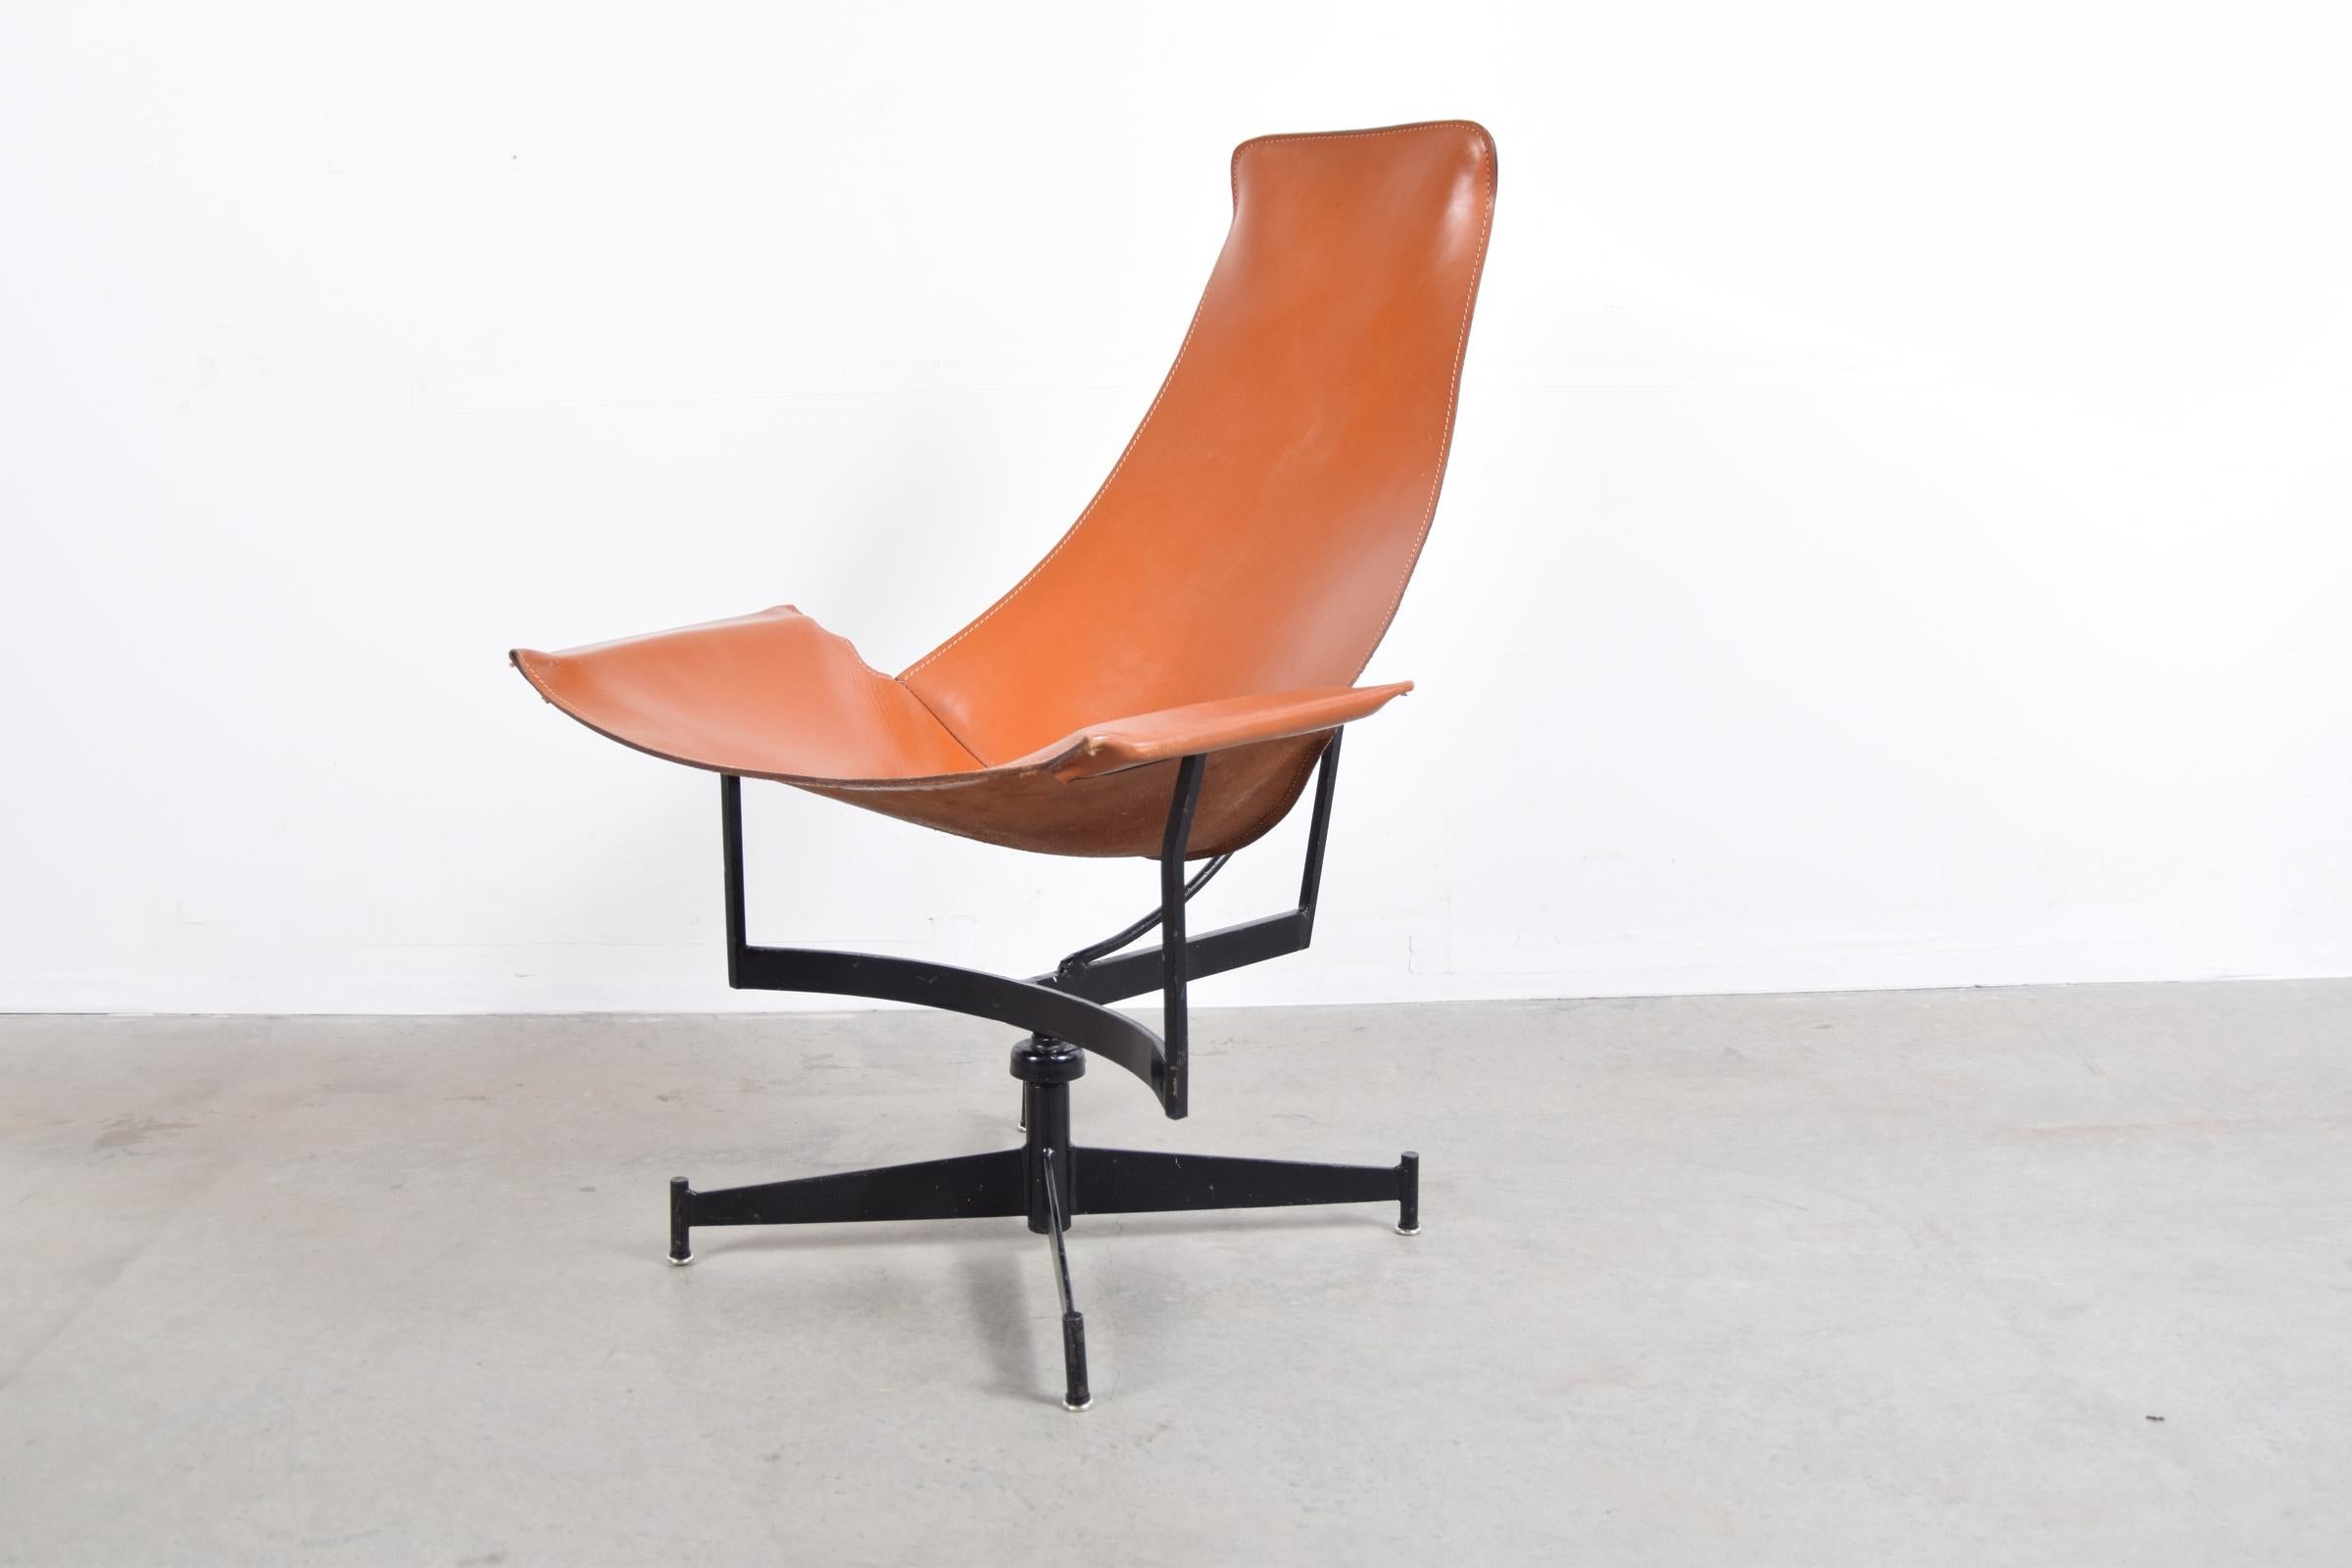 William Katavolos for Leathercrafter Leather Swivel Sling Chair circa 1966. Full hide leather and steel. The chair measures 31